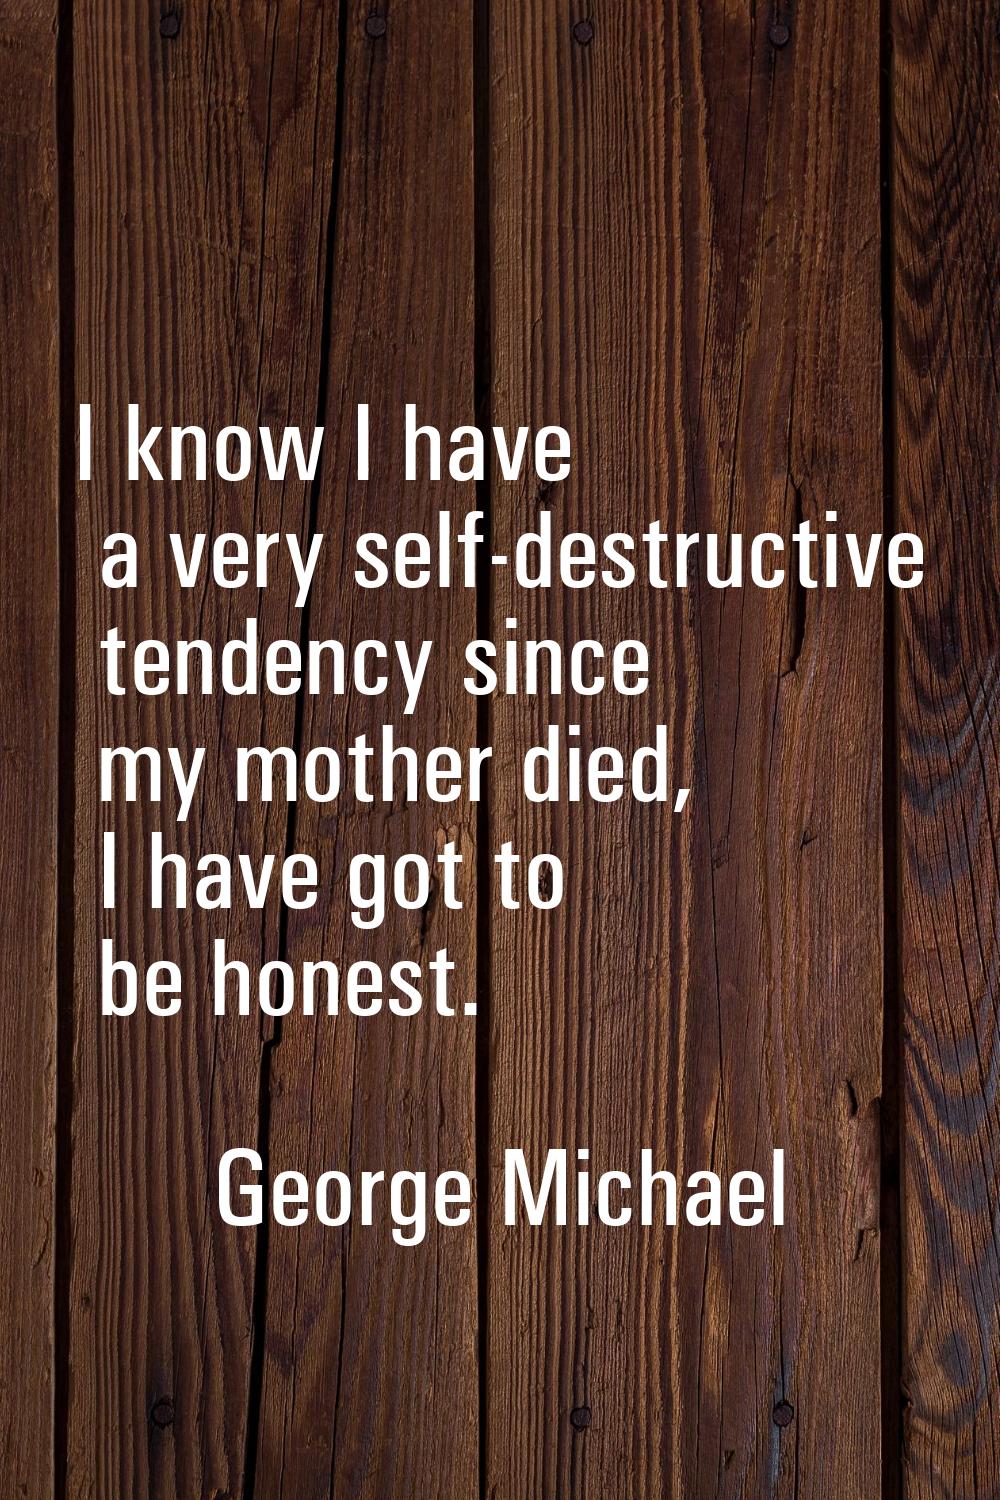 I know I have a very self-destructive tendency since my mother died, I have got to be honest.